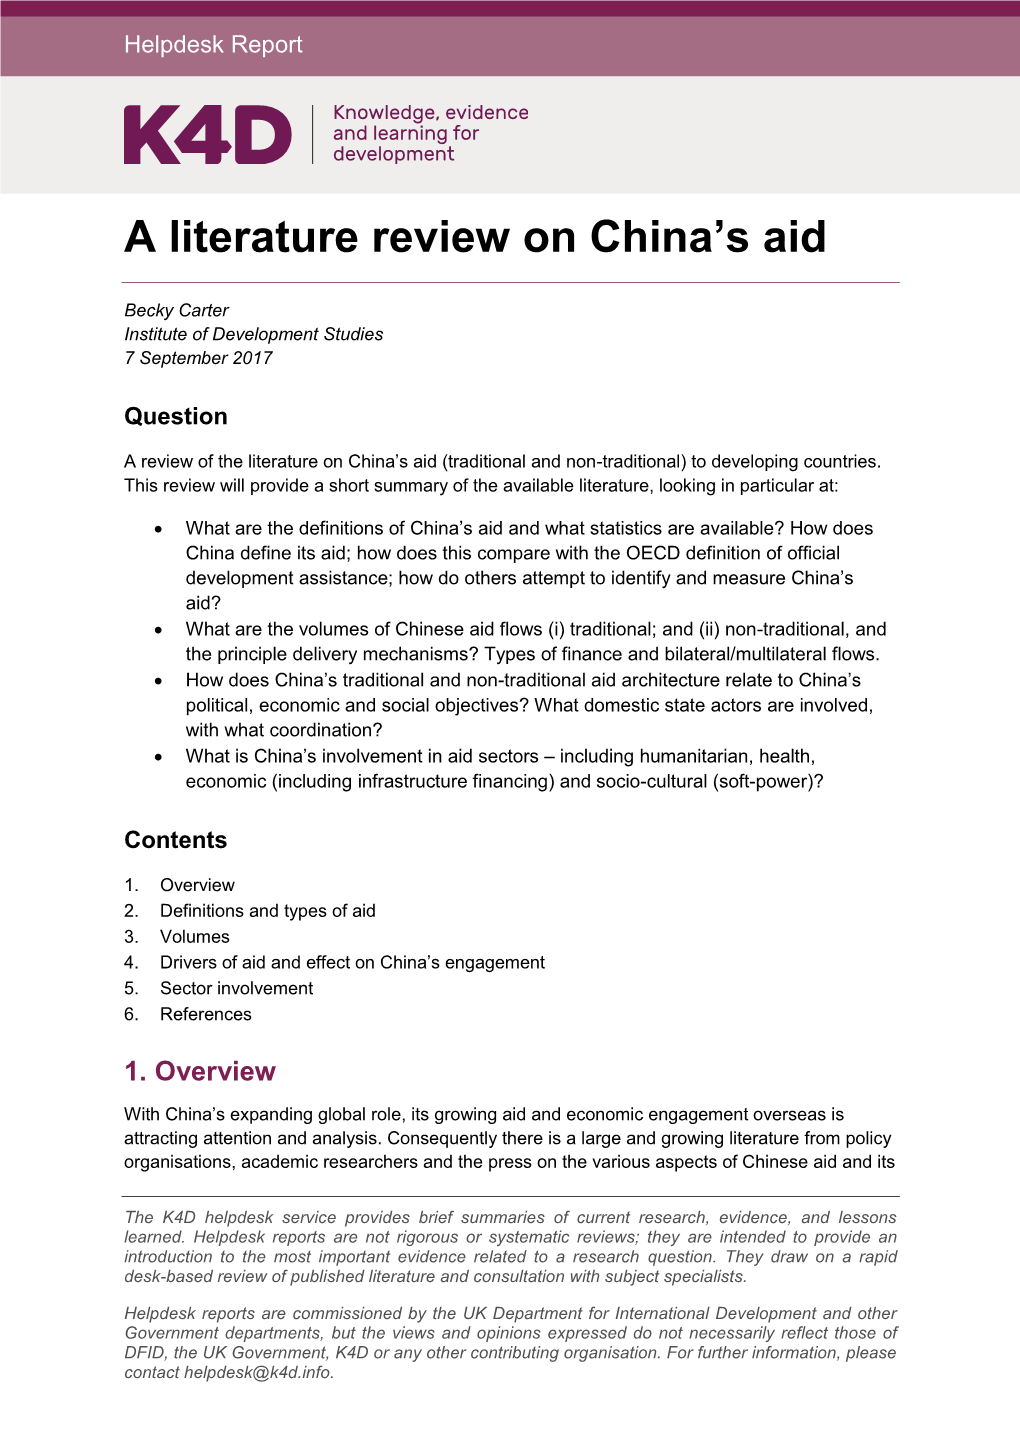 A Literature Review on China's